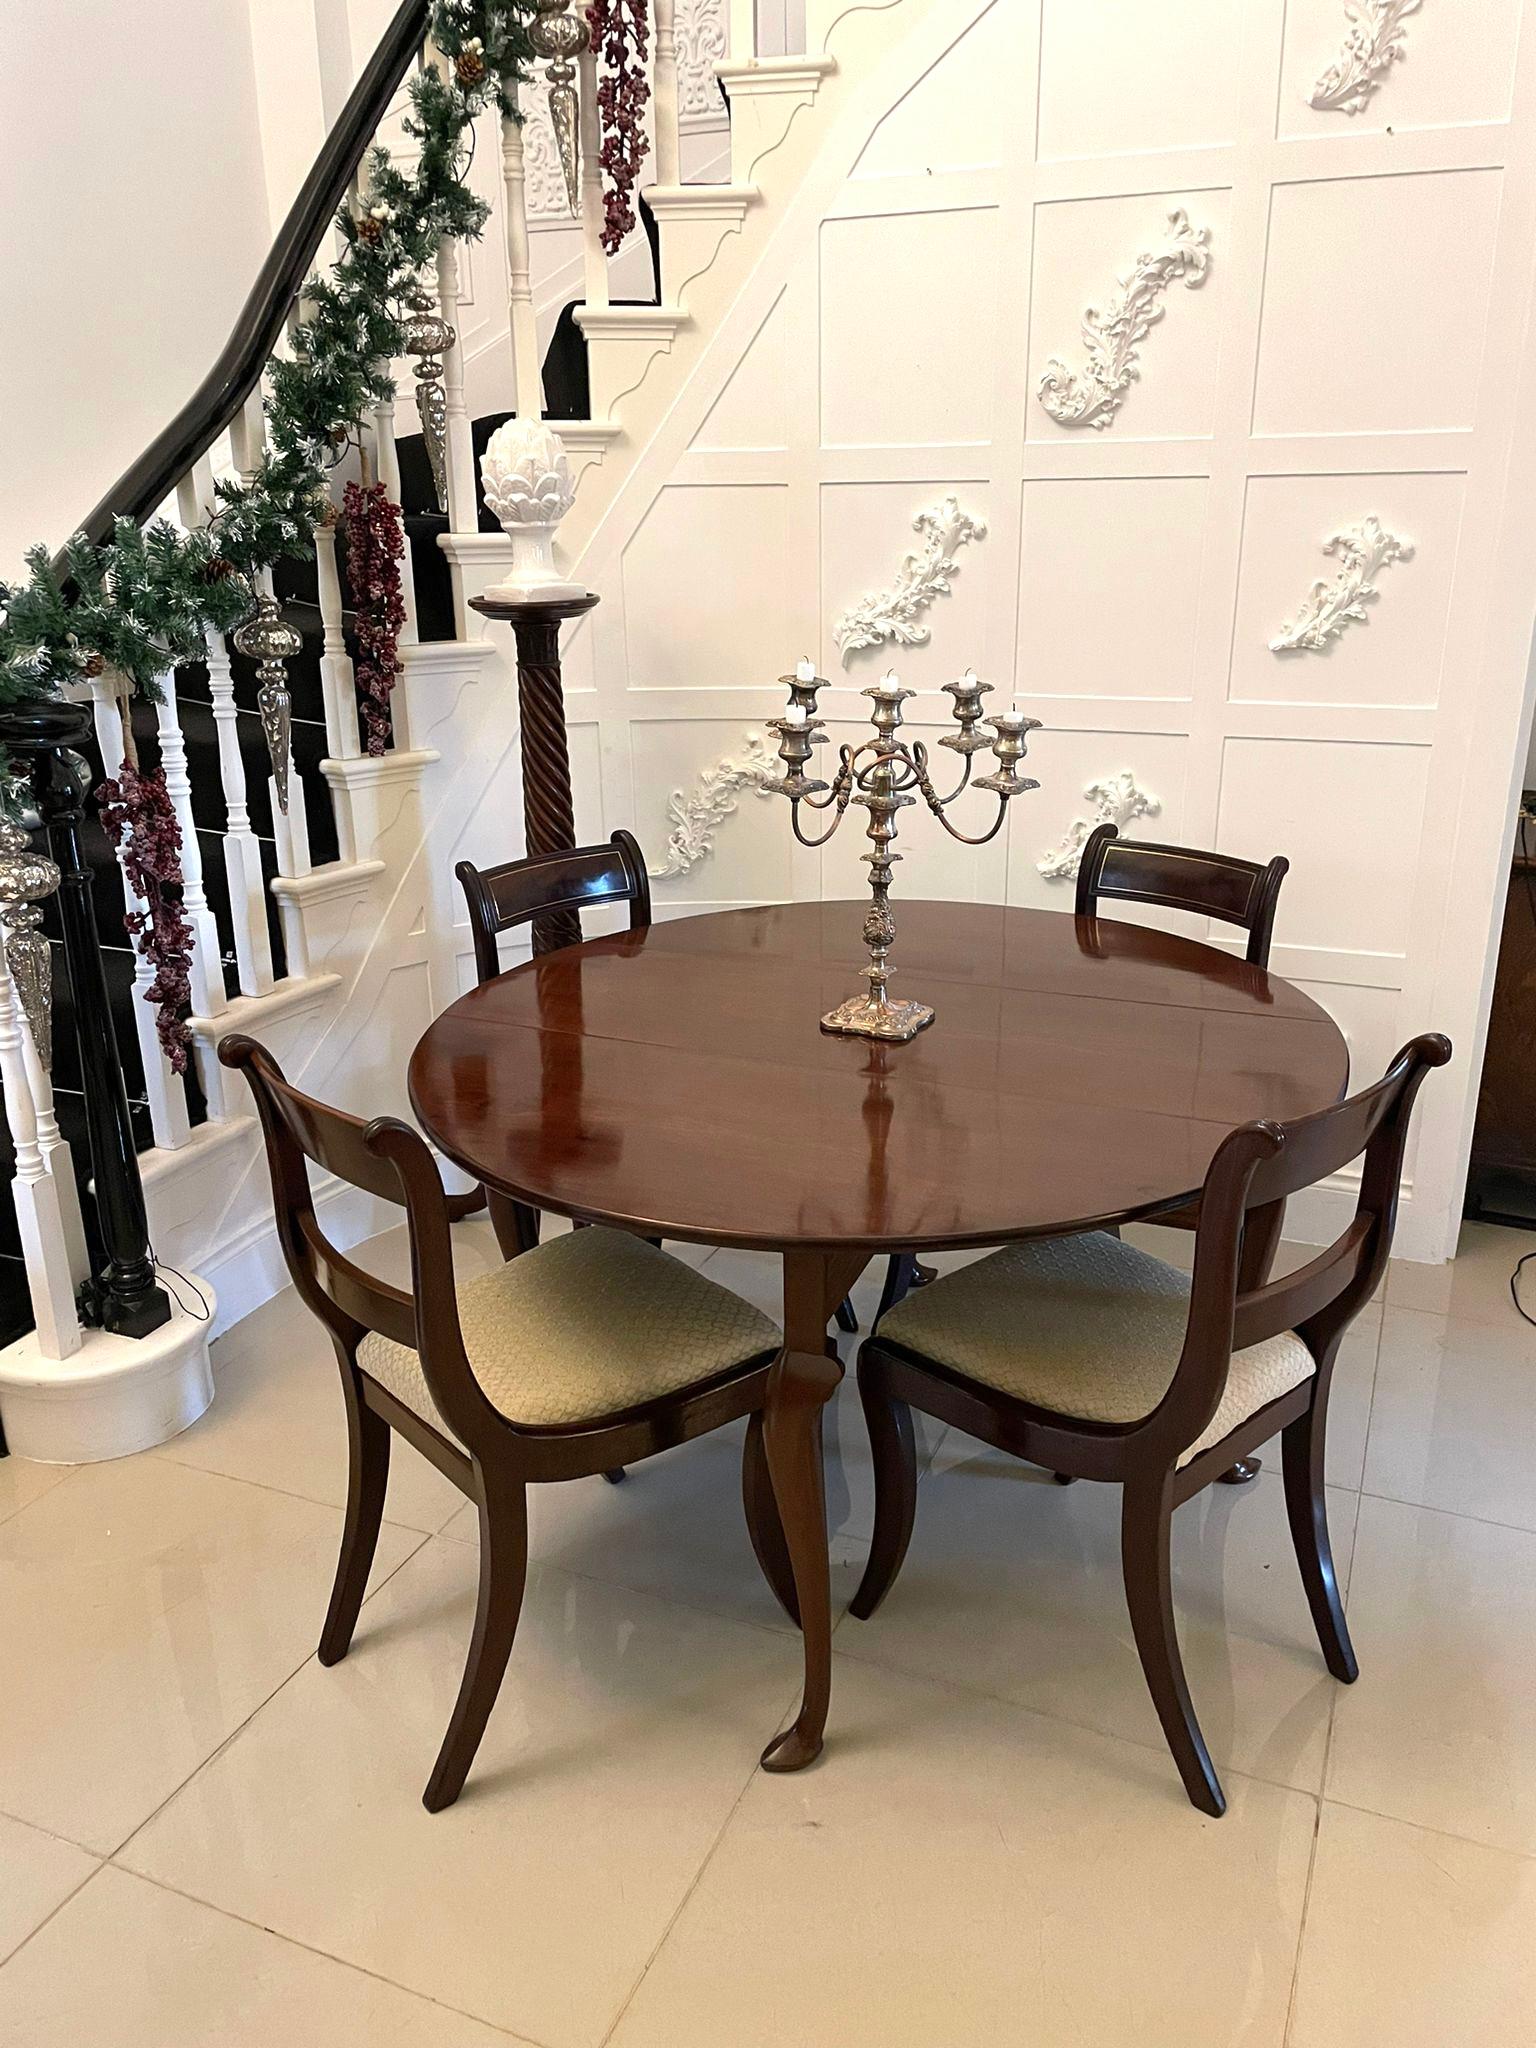 Antique George III quality mahogany drop leaf dining table having a quality mahogany top with oval drop leaves supported by swing out gate legs standing on shaped cabriole legs with elegant pad feet

This table is of excellent quality and boasts a